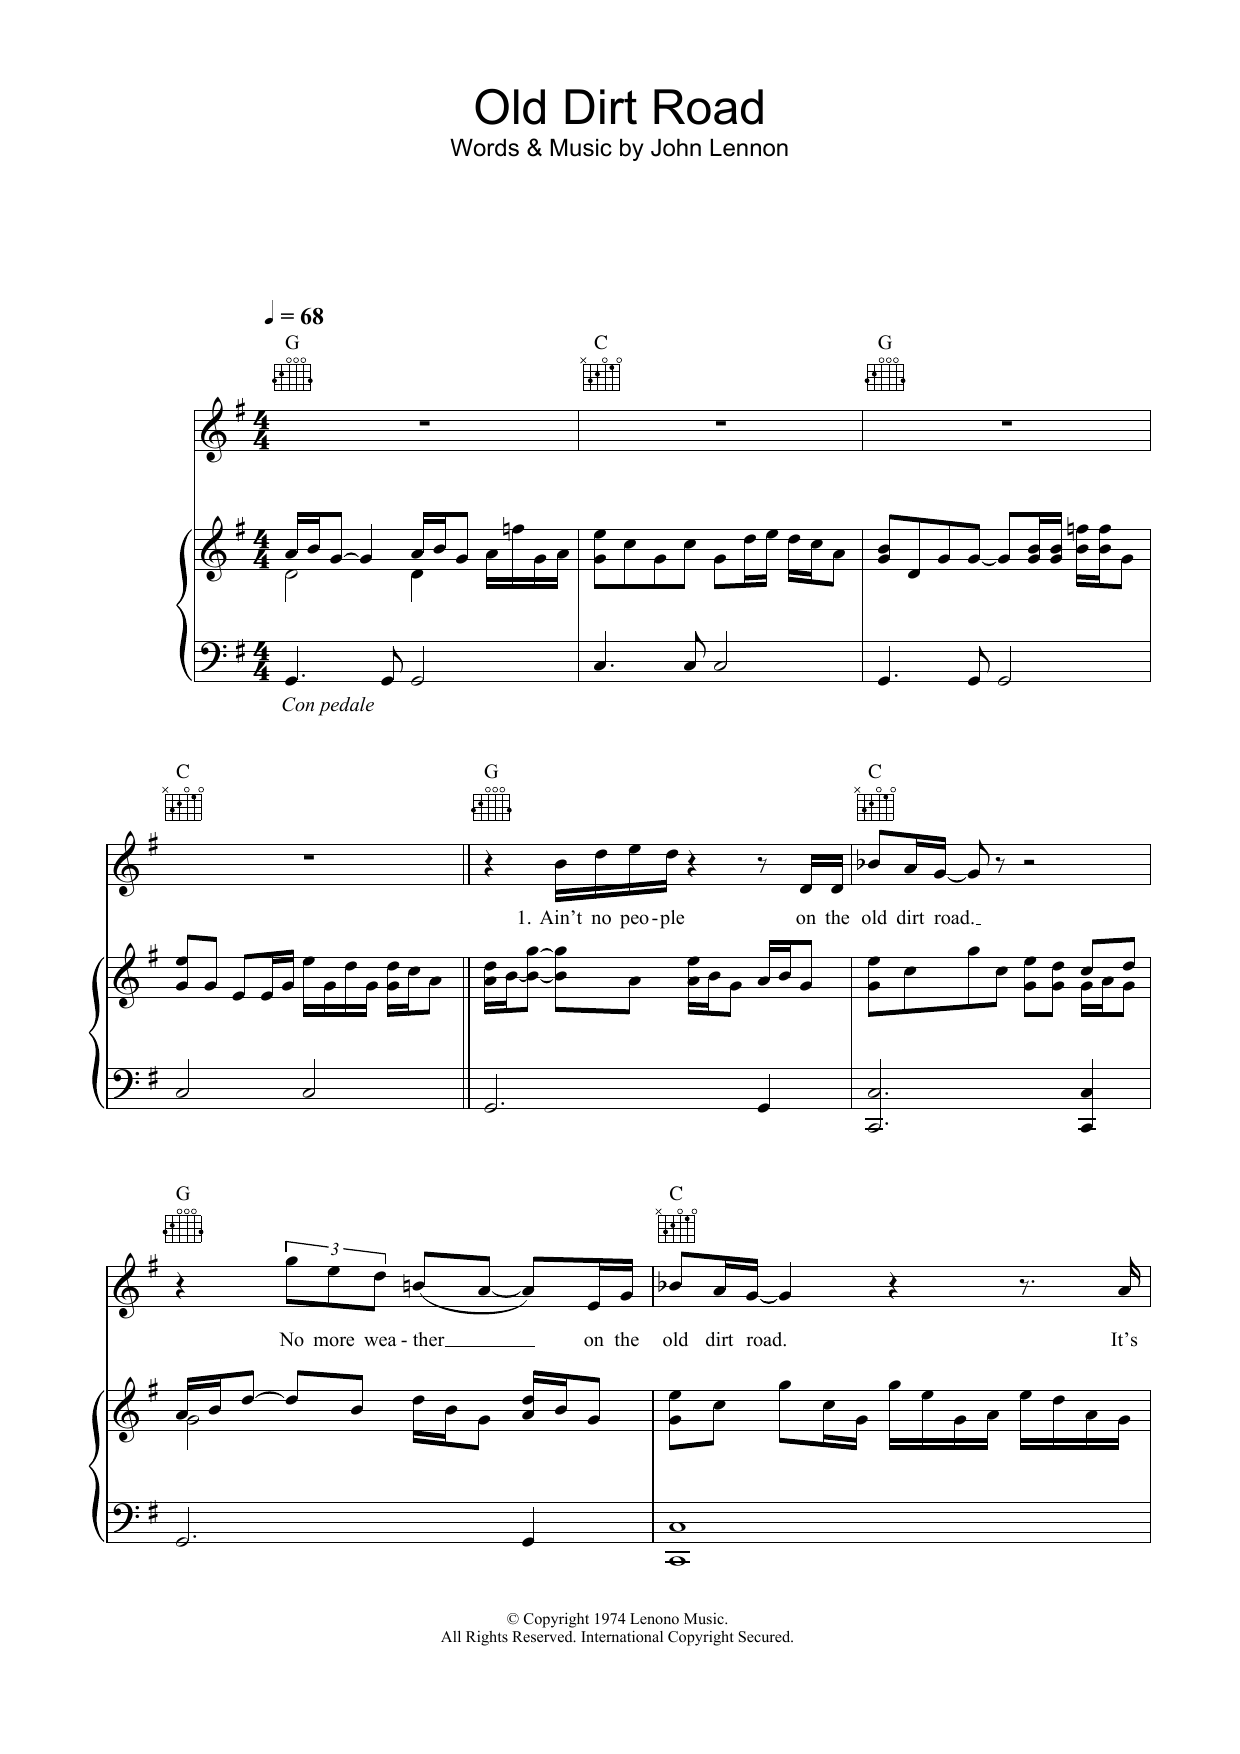 John Lennon Old Dirt Road sheet music notes and chords. Download Printable PDF.